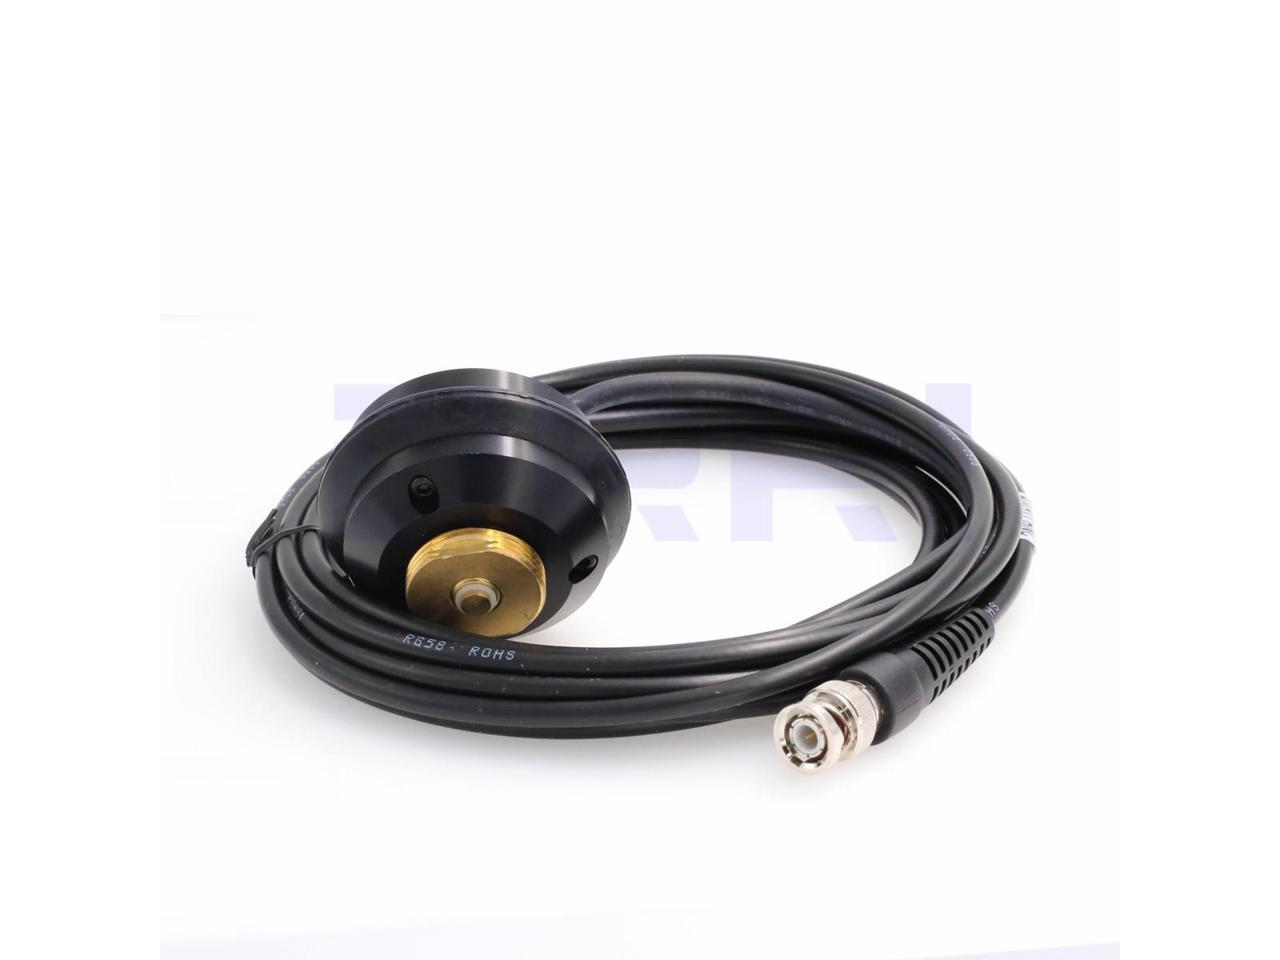 New 10M Trimble GPS whip Antenna Pole Mount BNC Connector 22720 Cable for GPS 